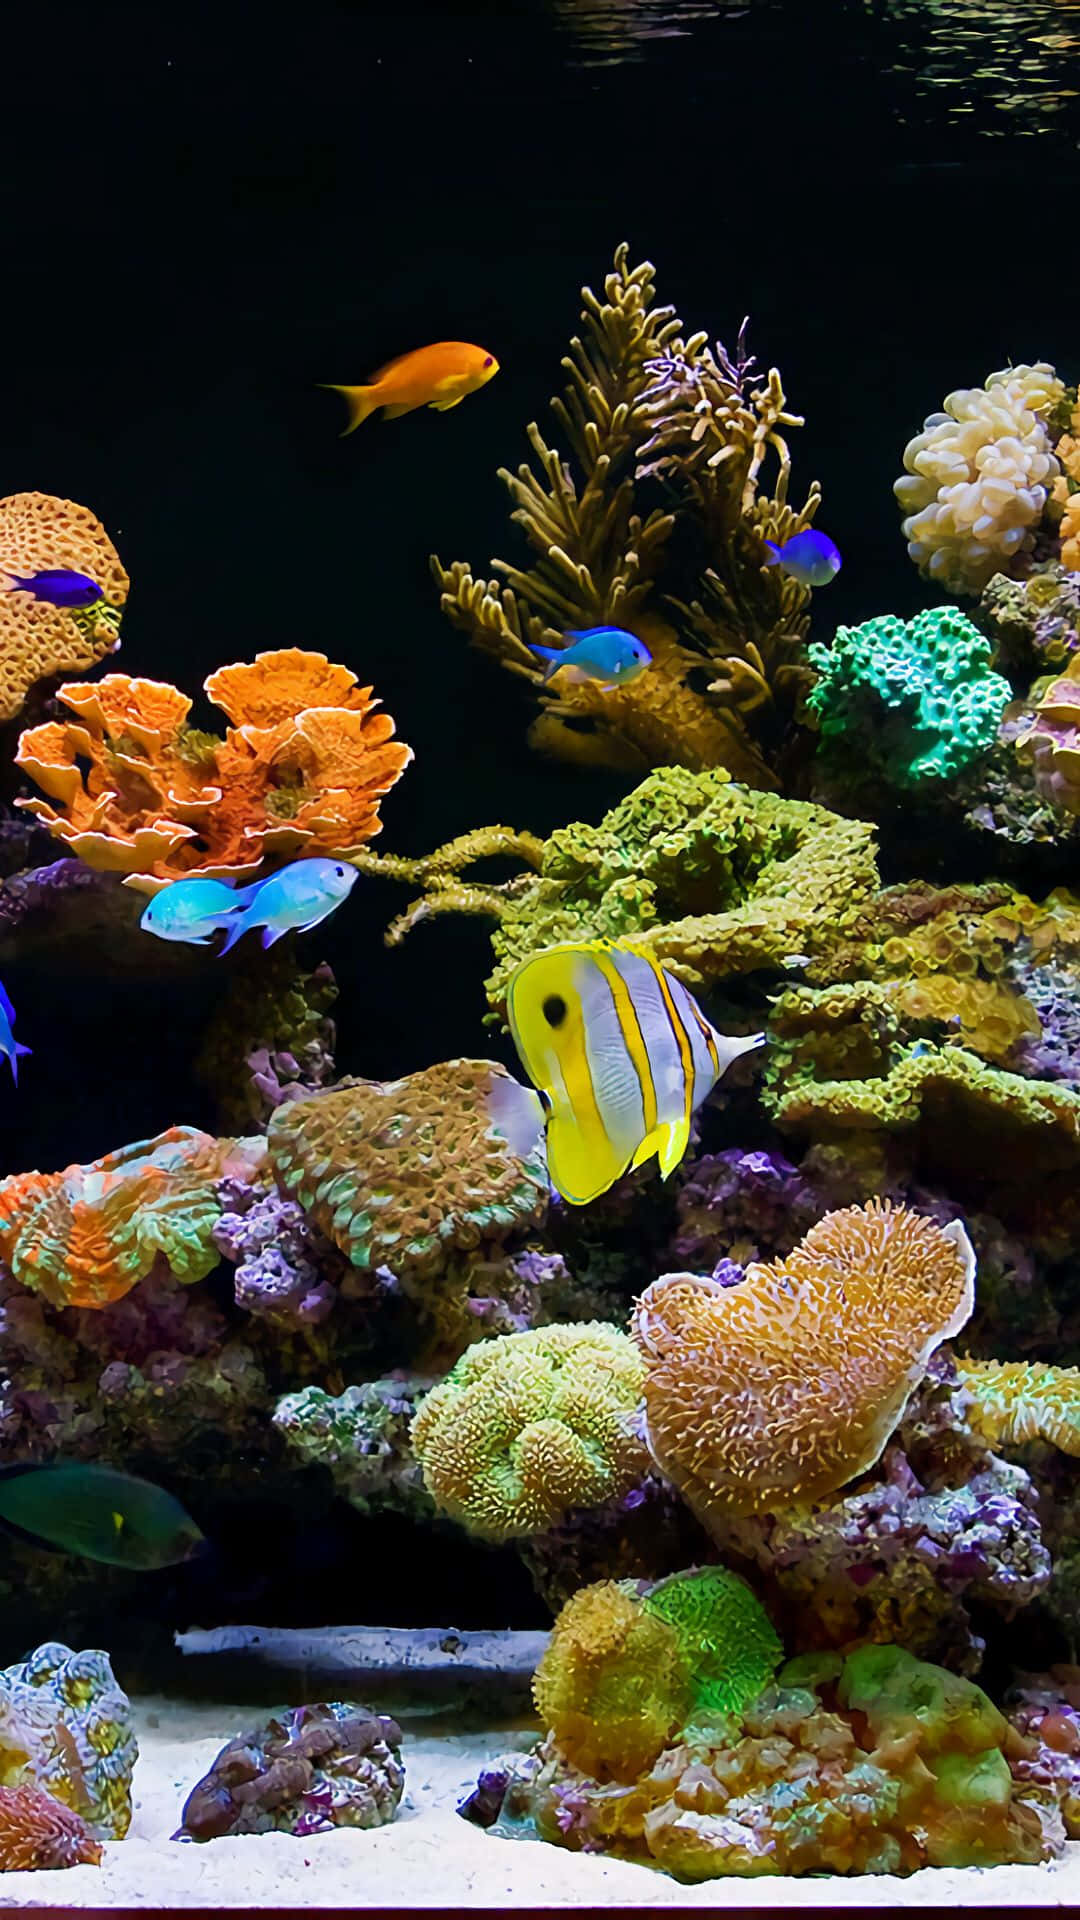 Explore the Depths of an Aquarium on your iPhone Wallpaper